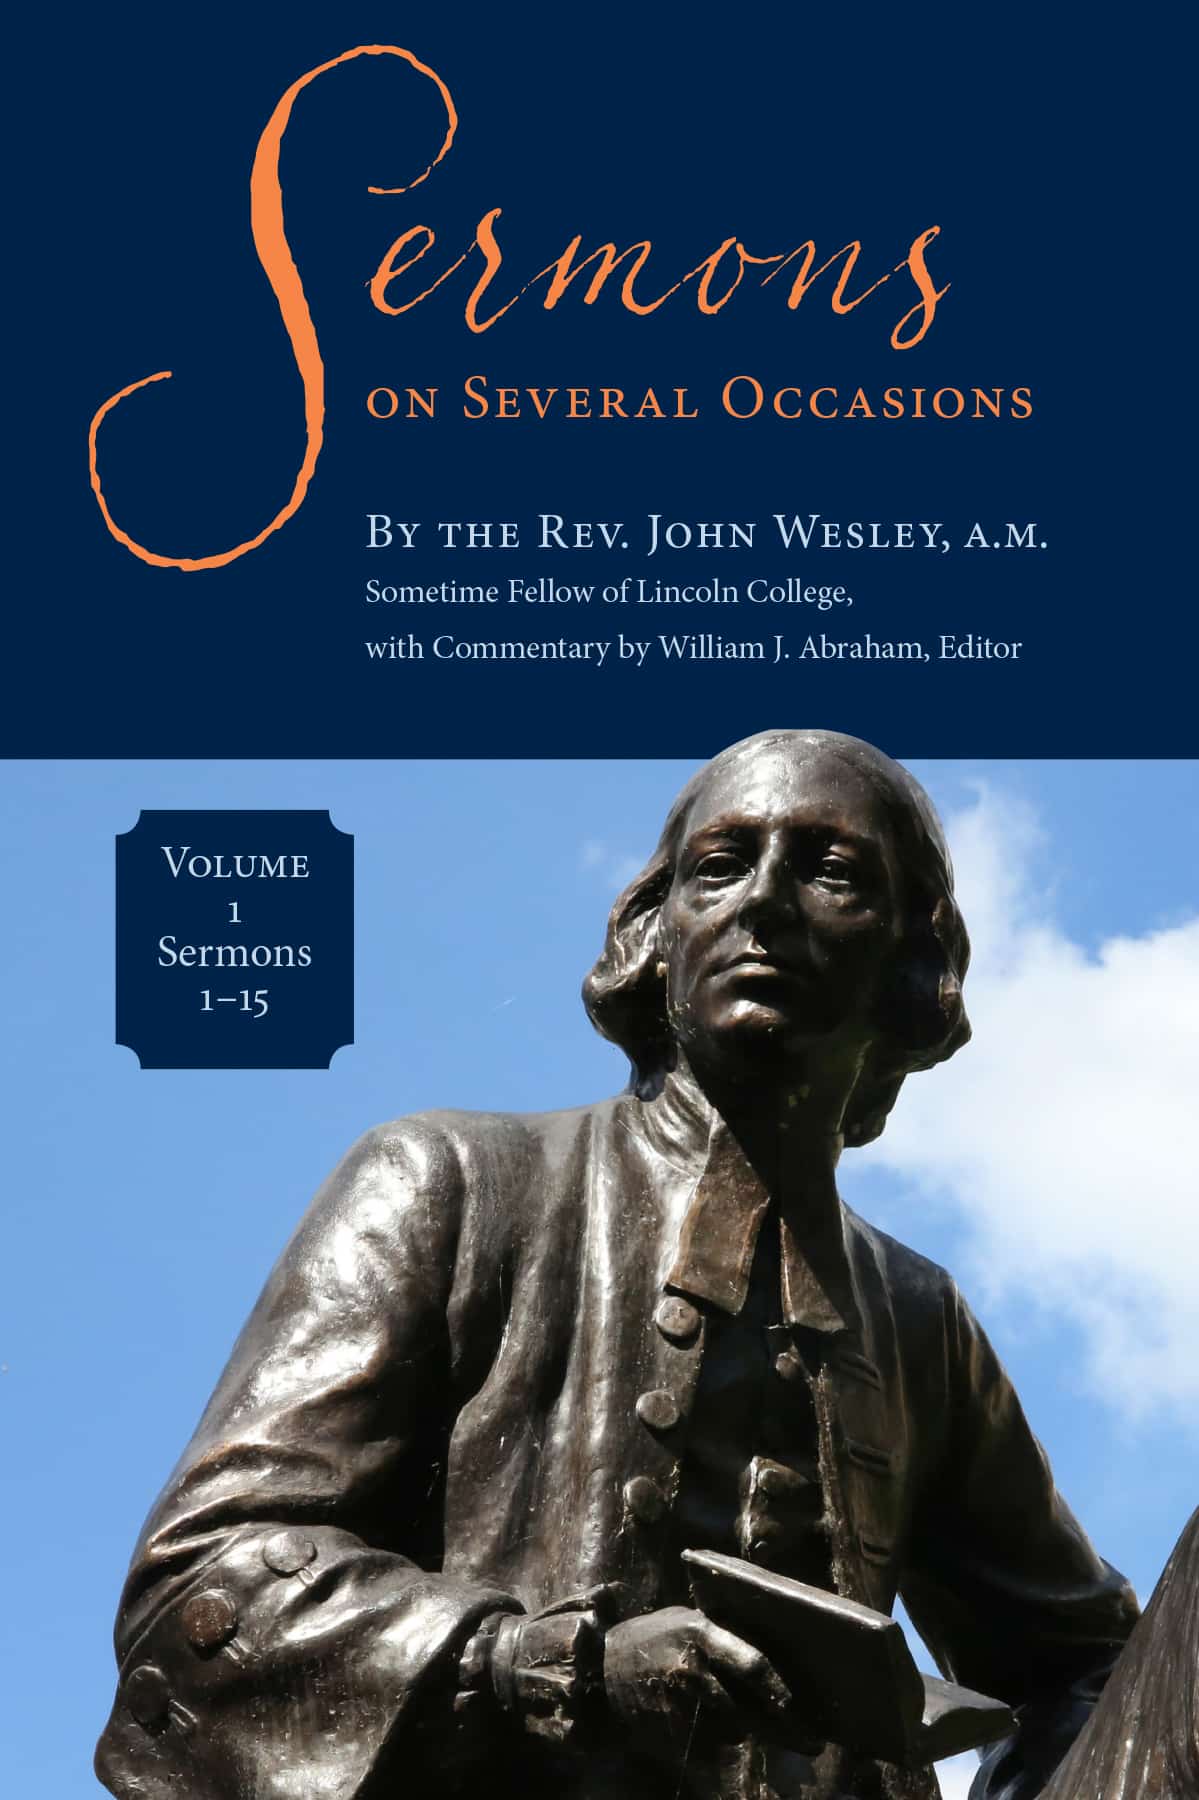 Sermons on Several Occasions, Vol. 1